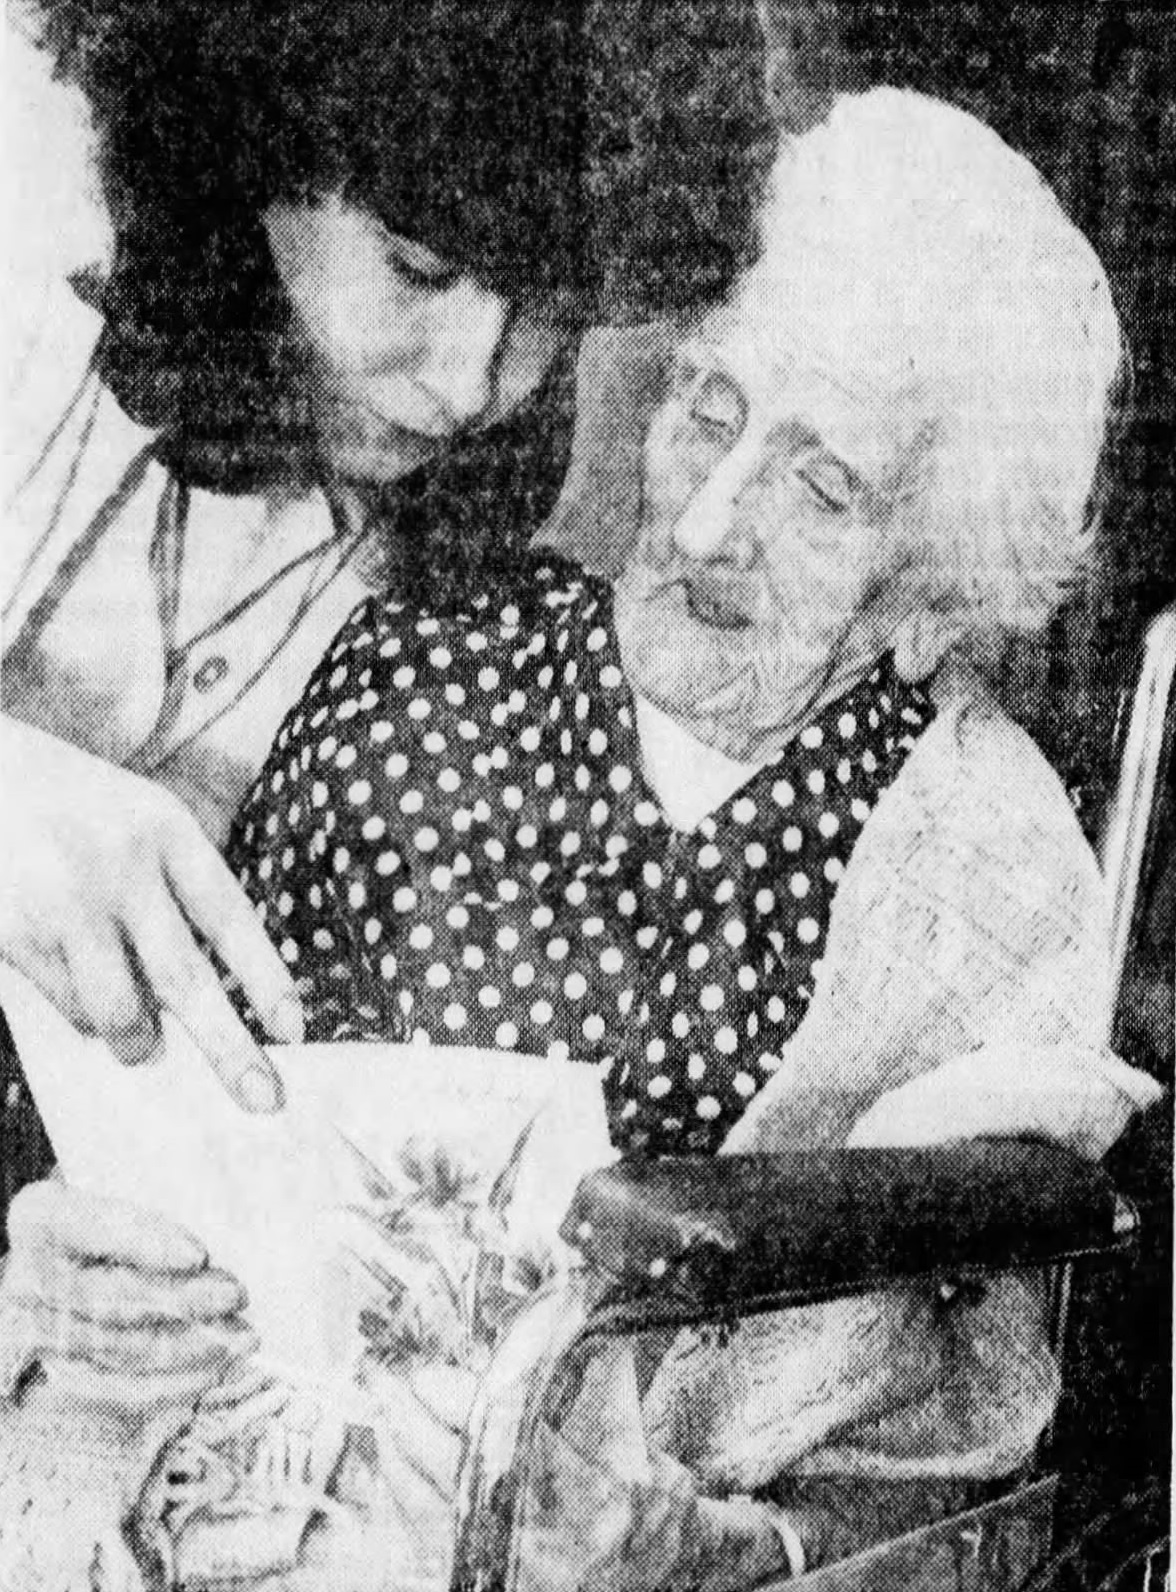 On her 109th birthday in 1981. (Source: The Pittsburgh Press)